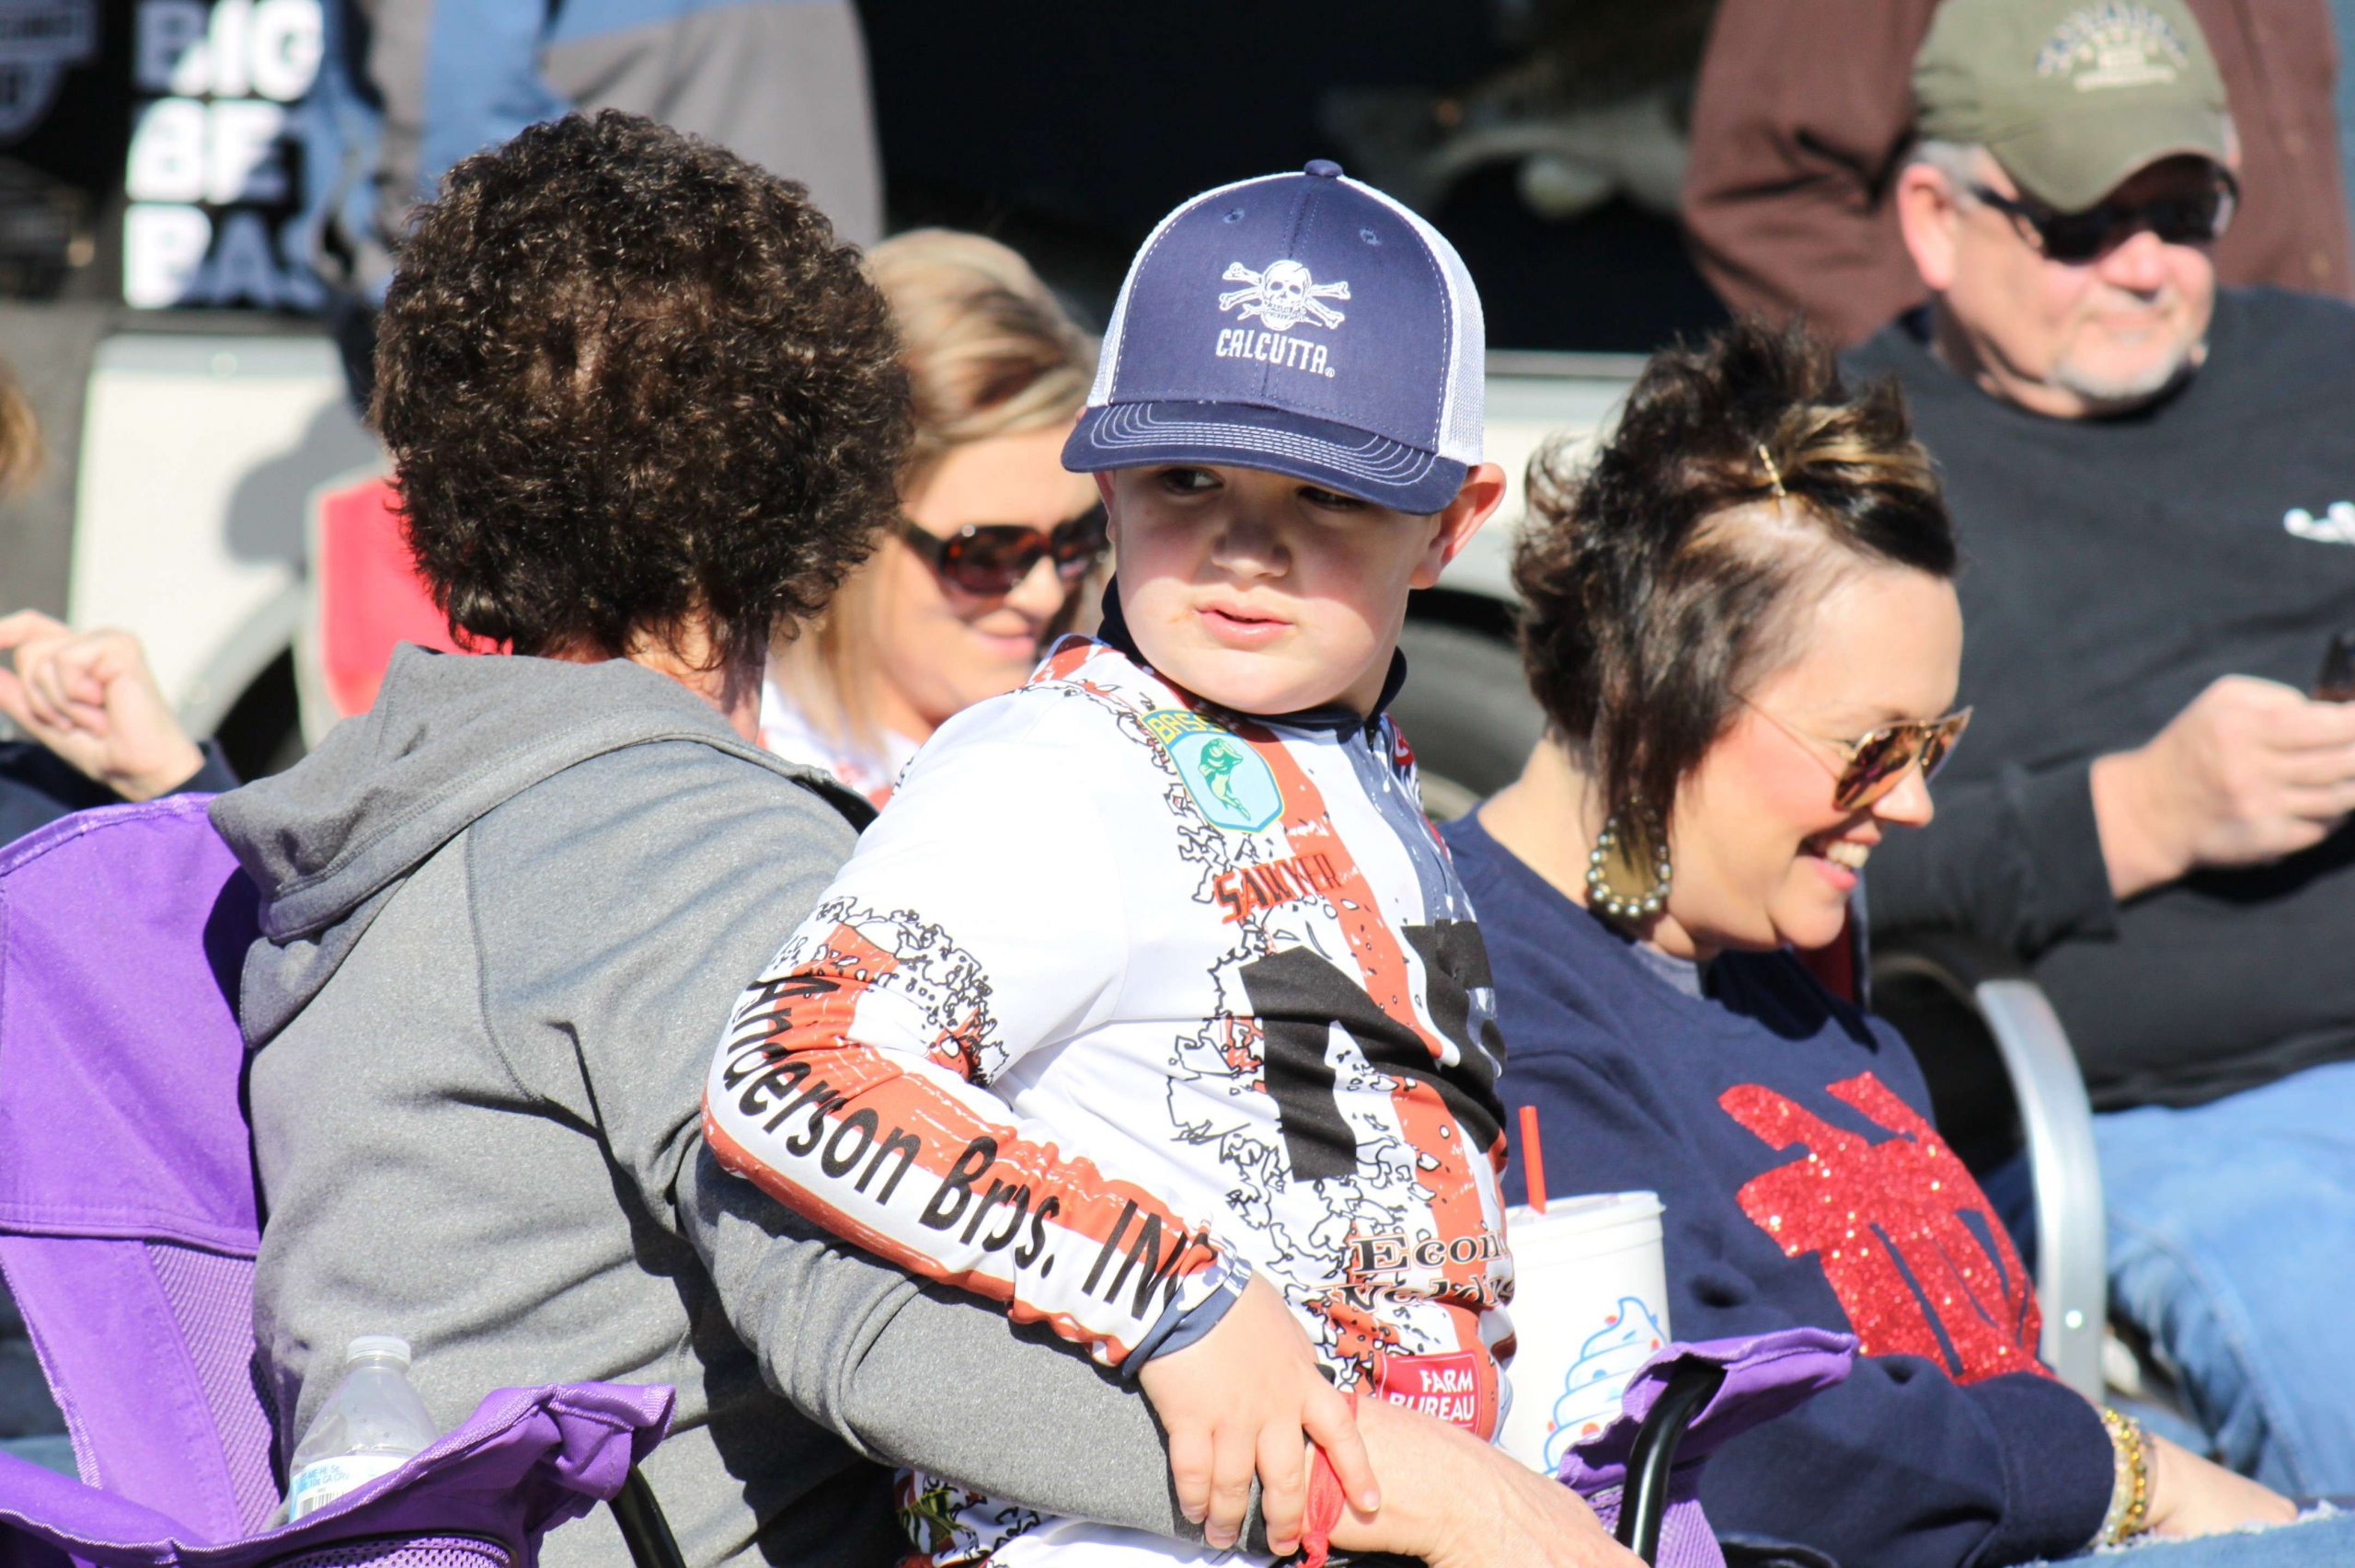 They traveled with their extended families too â moms, dads, grandparents, siblings and friends. Sundayâs weather was ideal for catching and the fans were ready for some action.